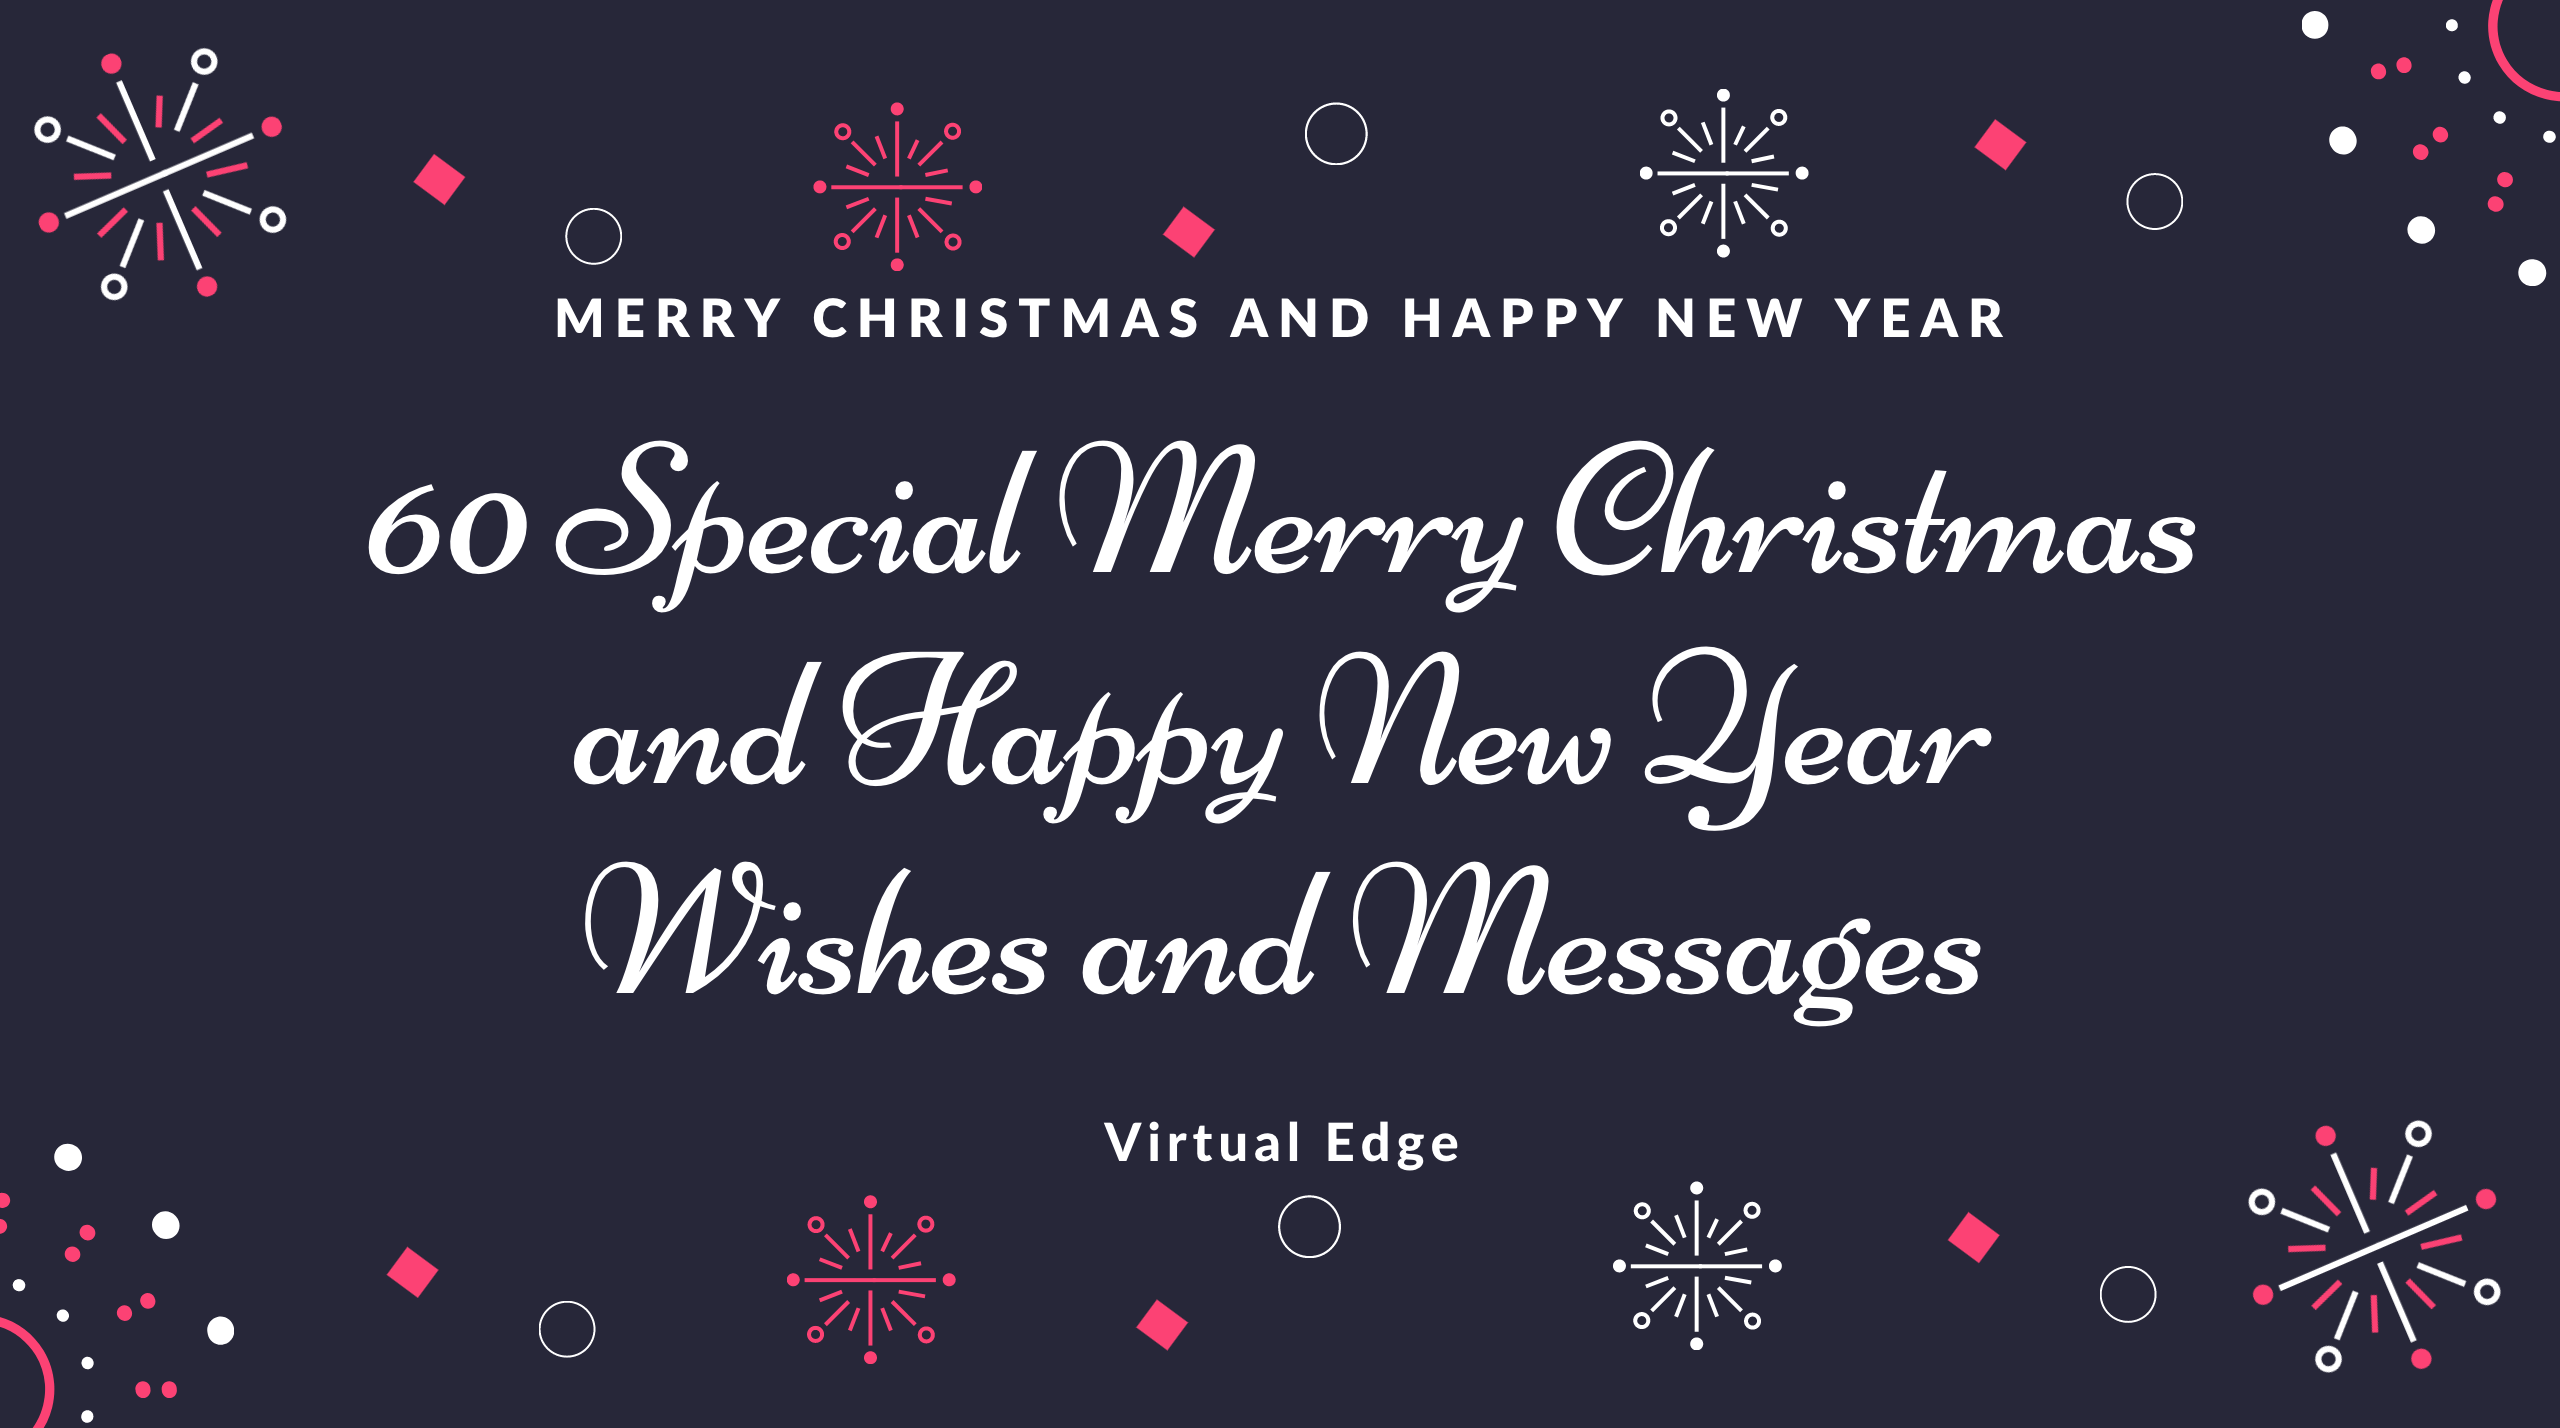 60 Special Merry Christmas and Happy New Year Wishes and Messages